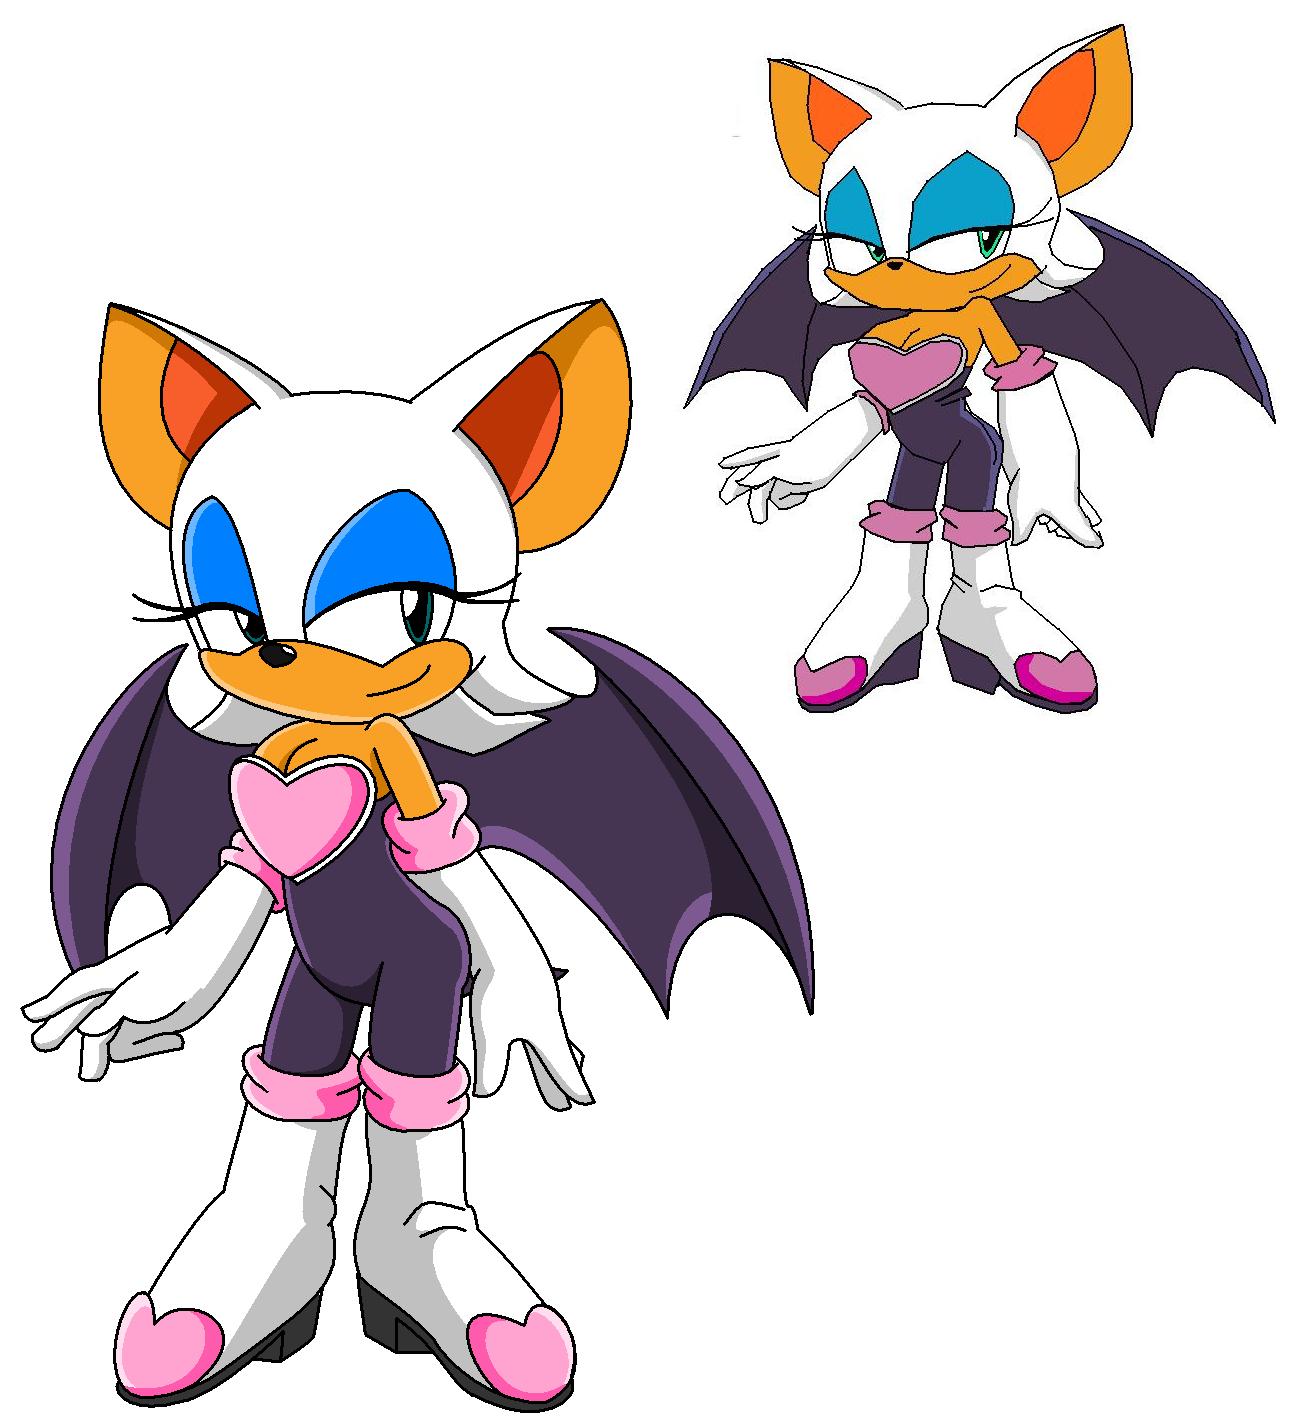 Rouge (Remade) by BoyIsCool